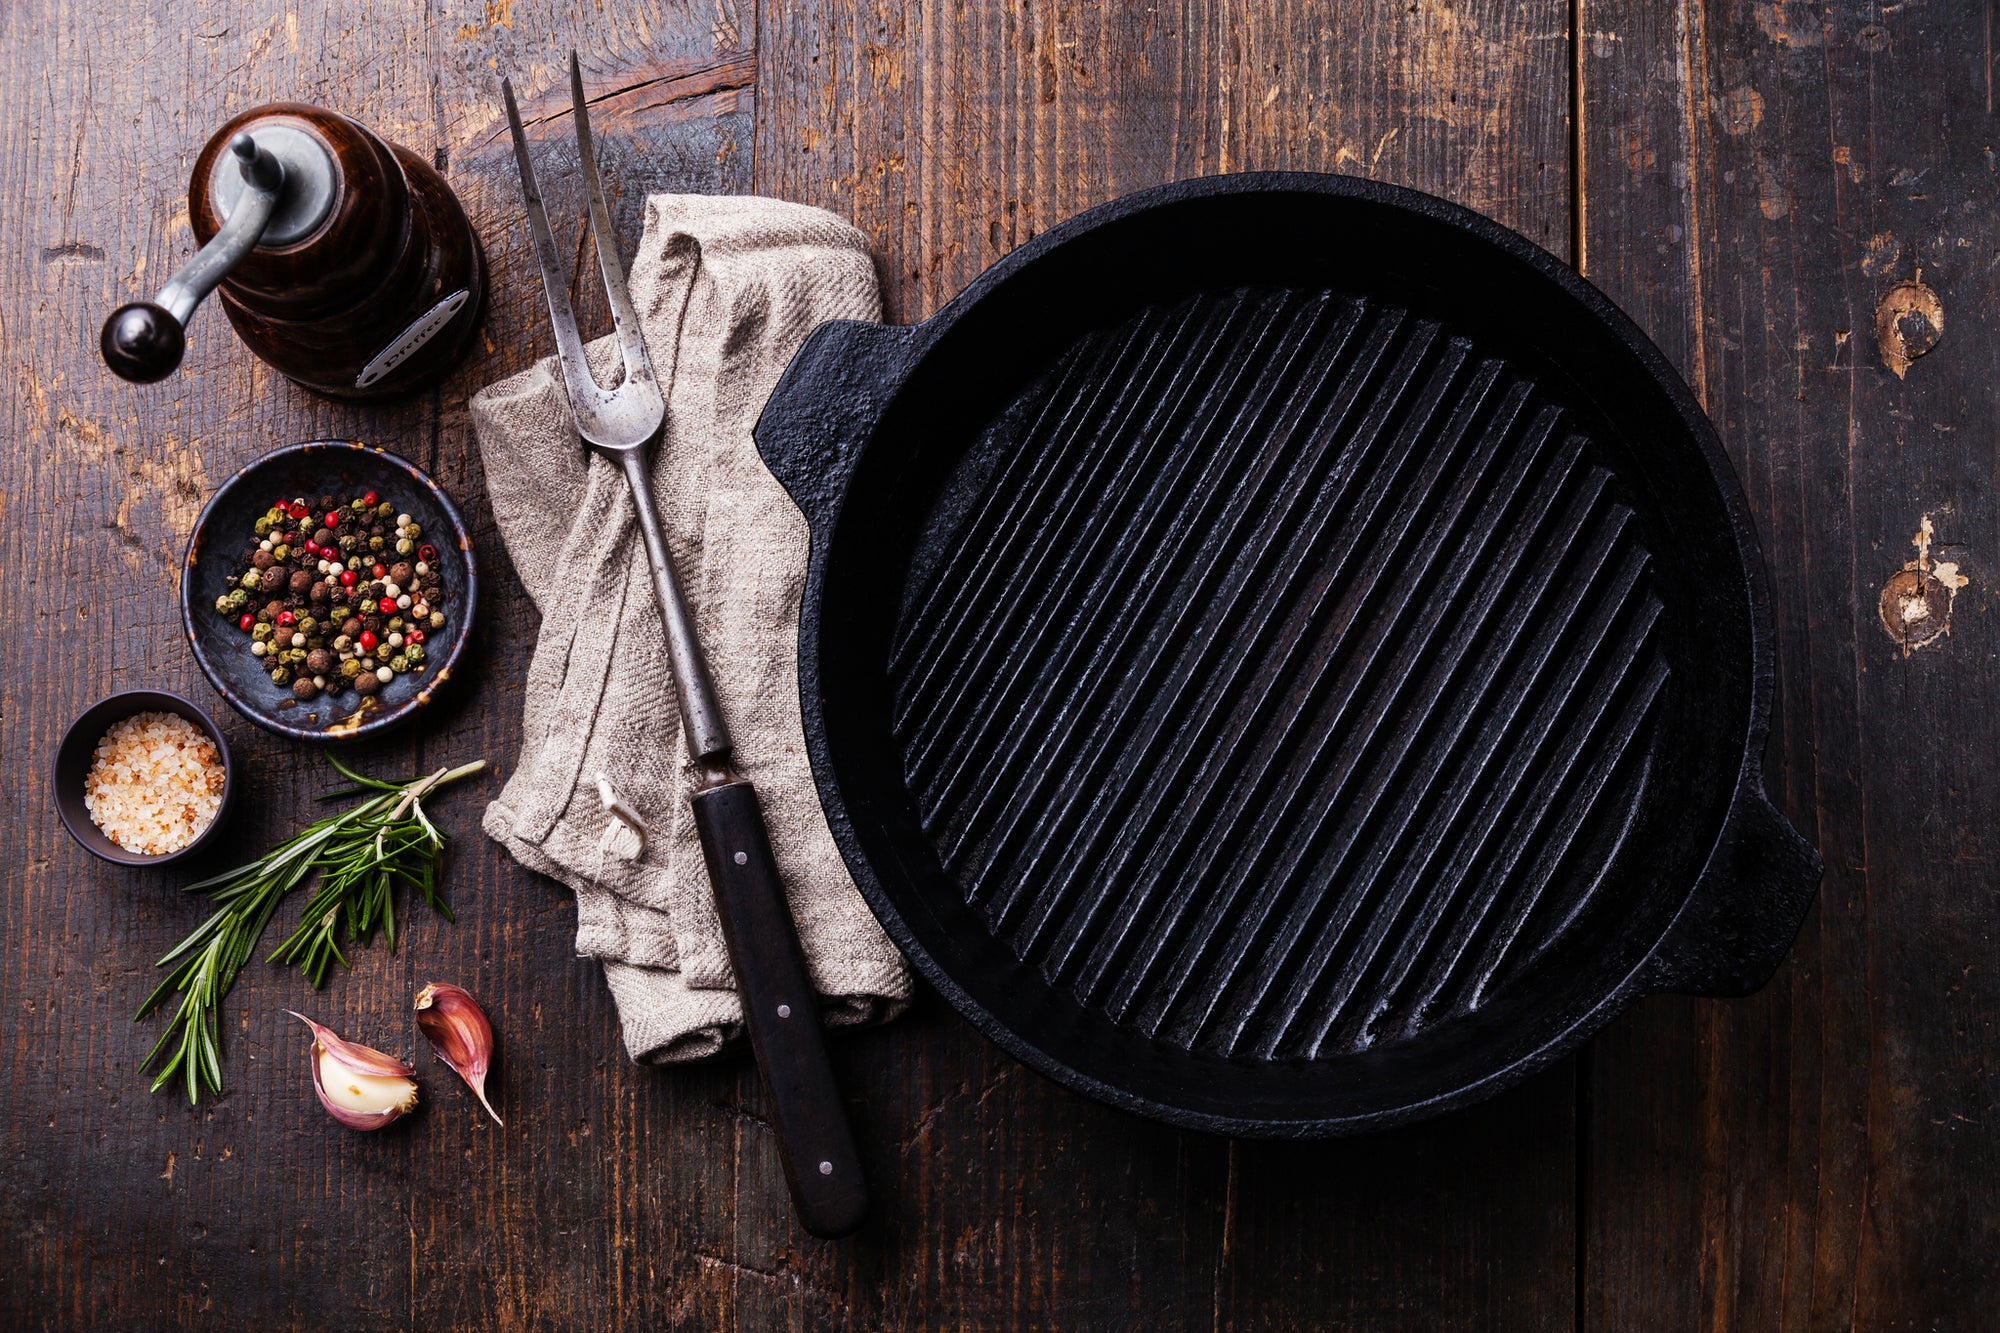 How to Season Cast Iron Cookware: The Complete Guide